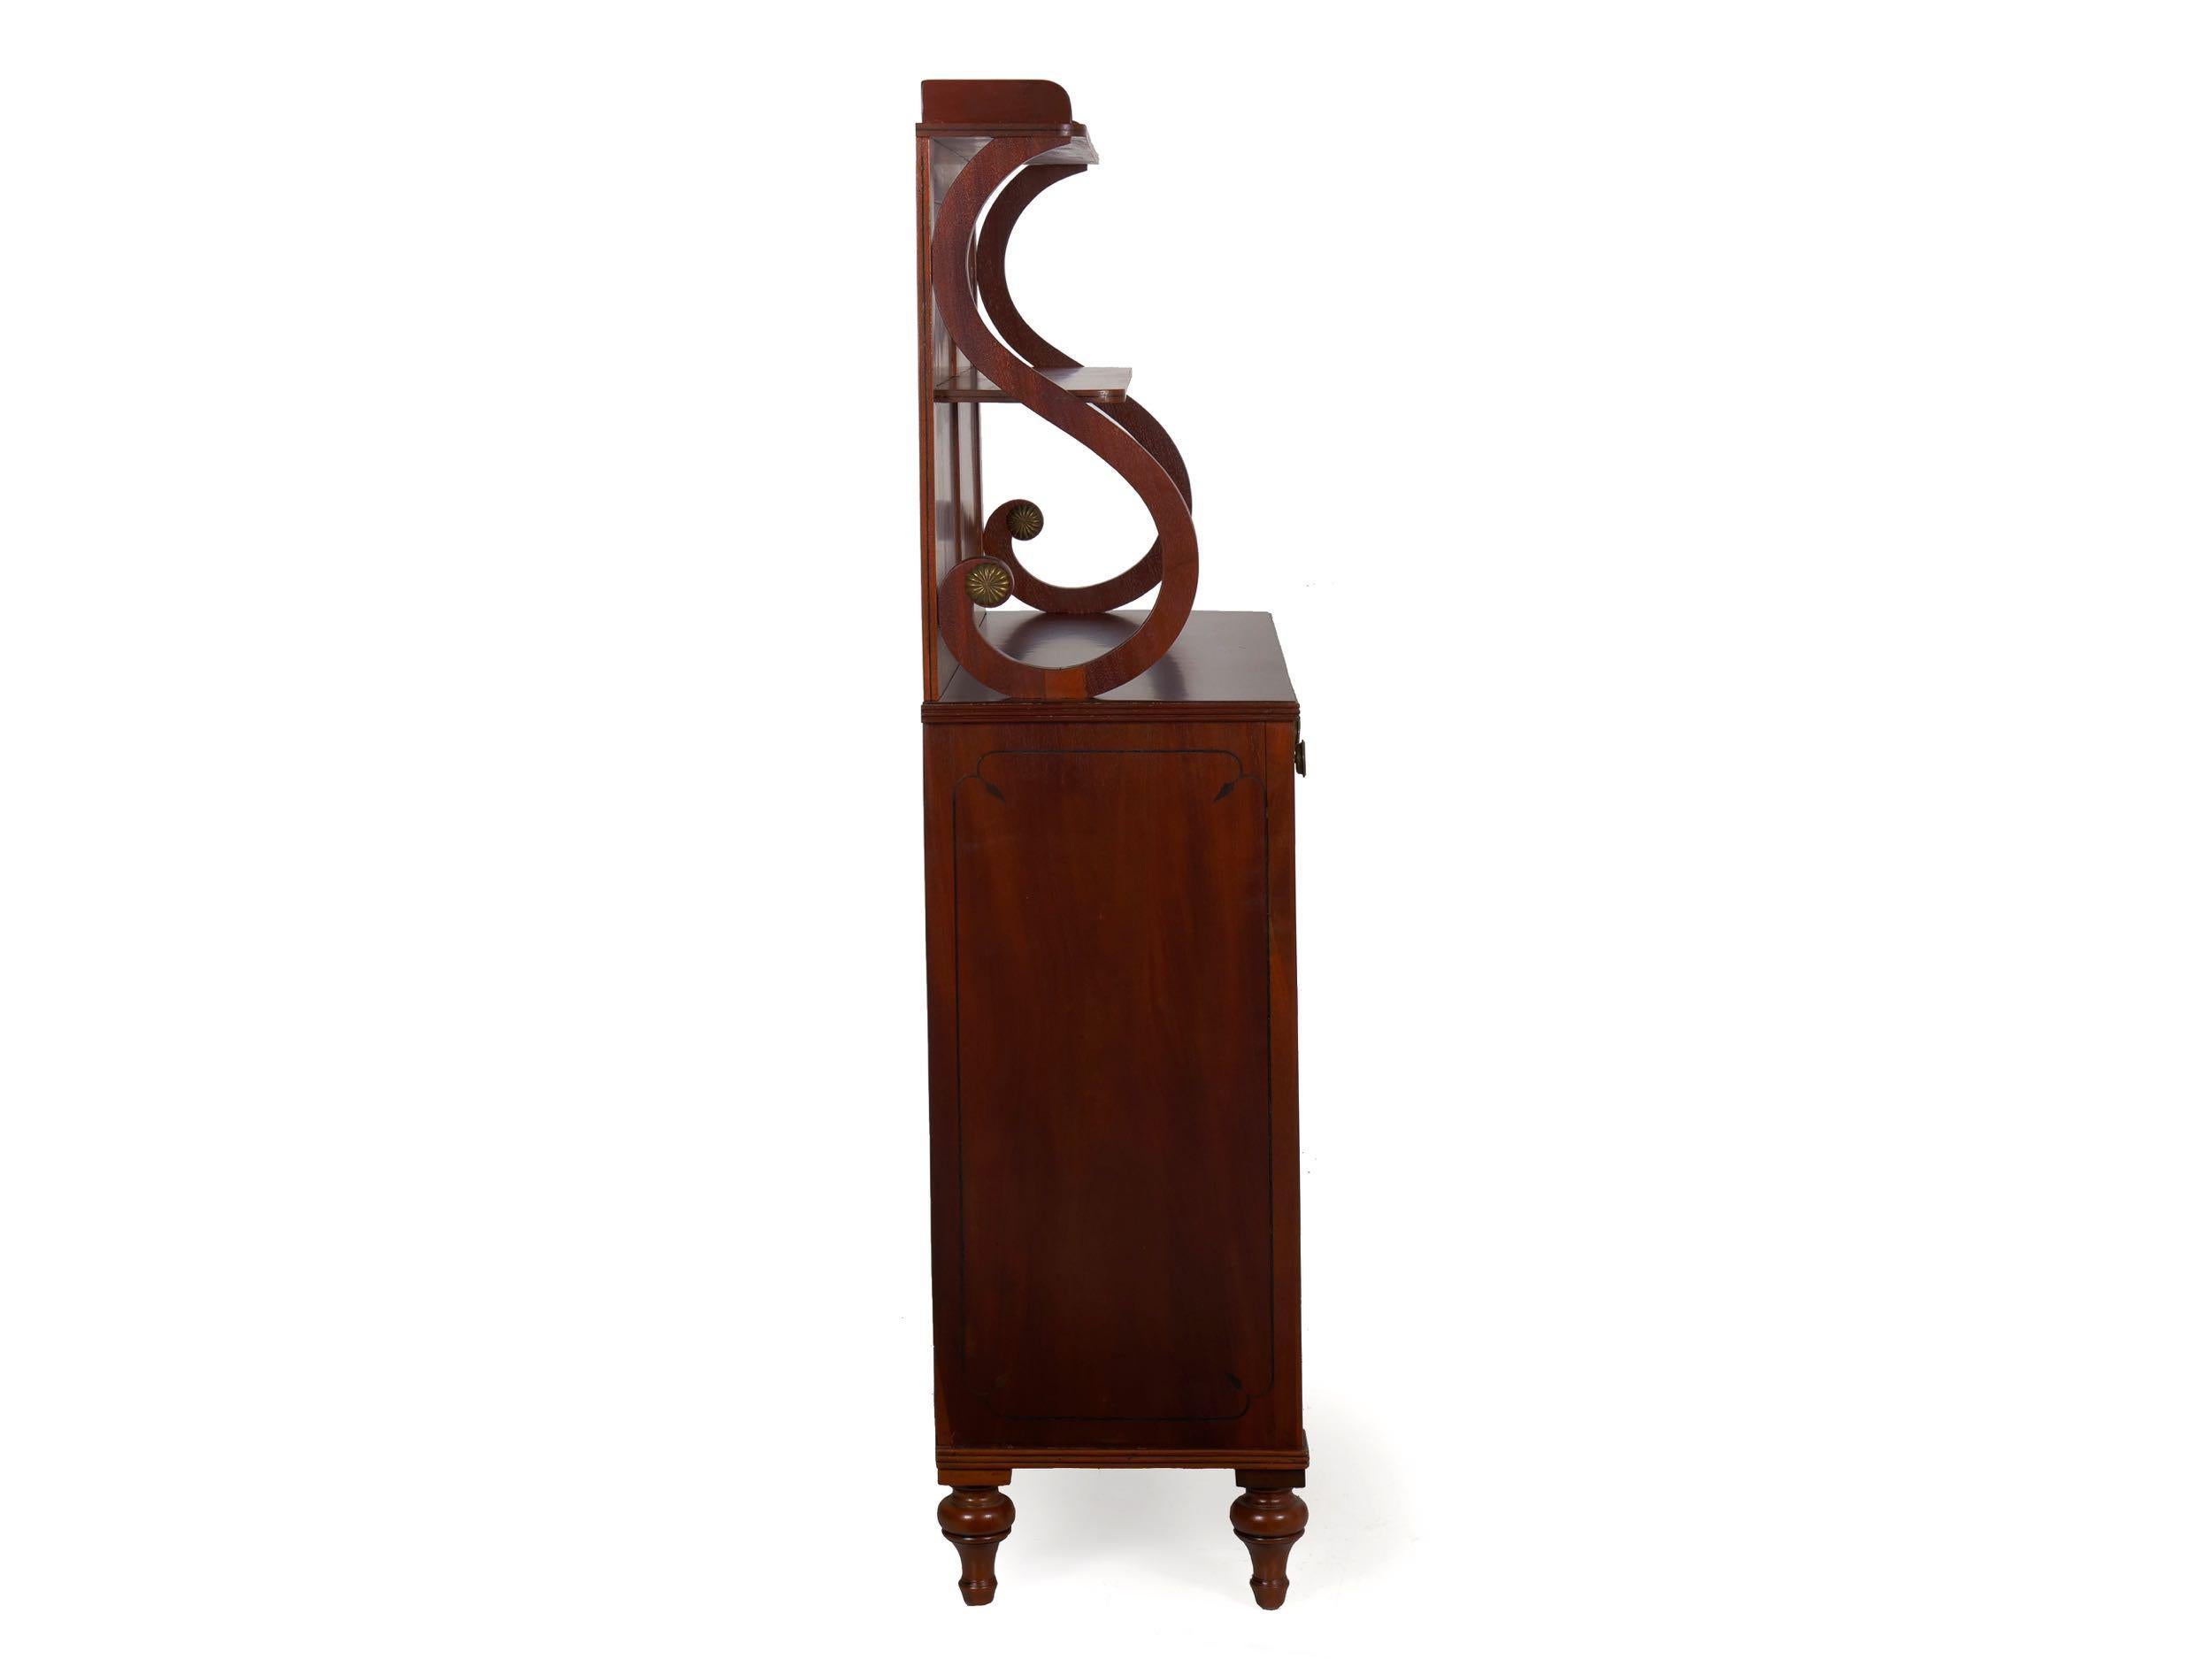 Regency mahogany brass-mounted chiffonier,
England, 19th century
Item # 902XFP09P 

With a diminutive form and tidy lines, this little Regency era chiffonier is the ideal size and proportion for today's home. Projecting only 14